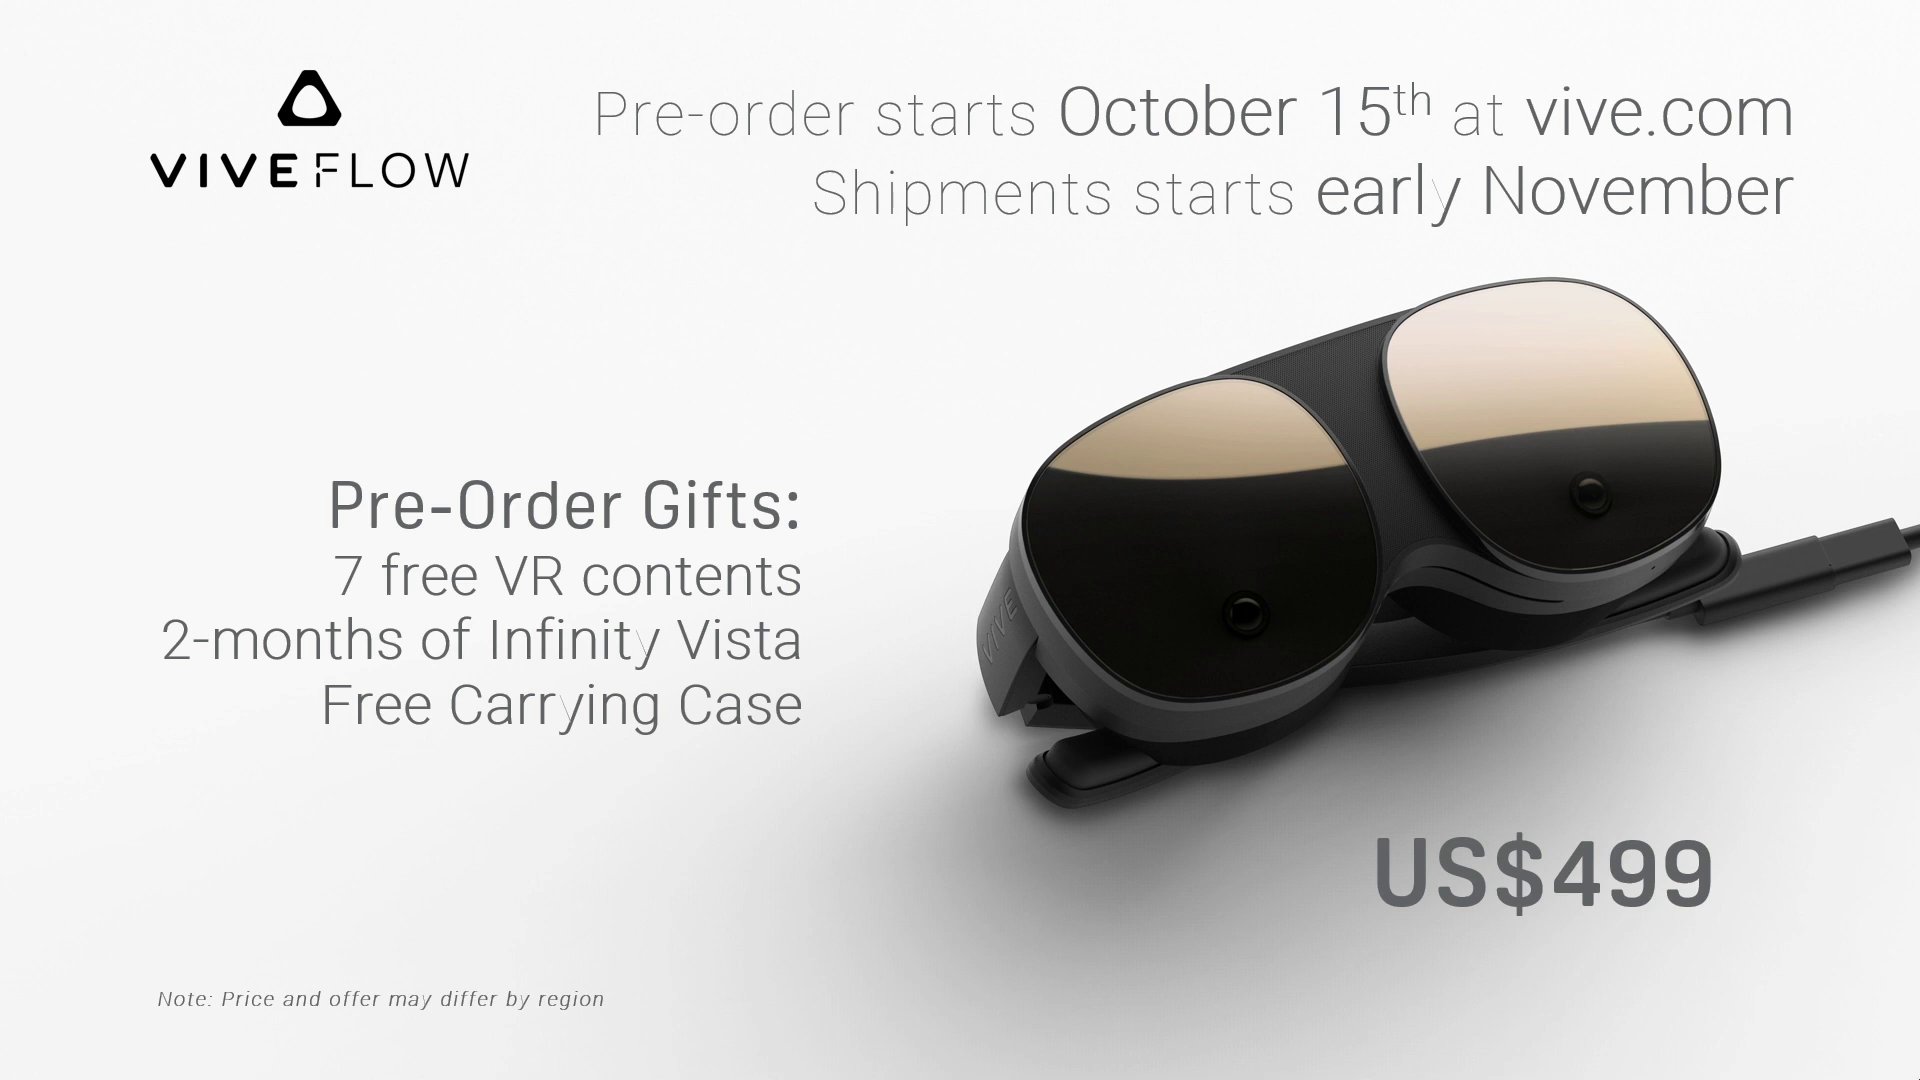 HTC's next VR headset leaks with a US$499 retail price